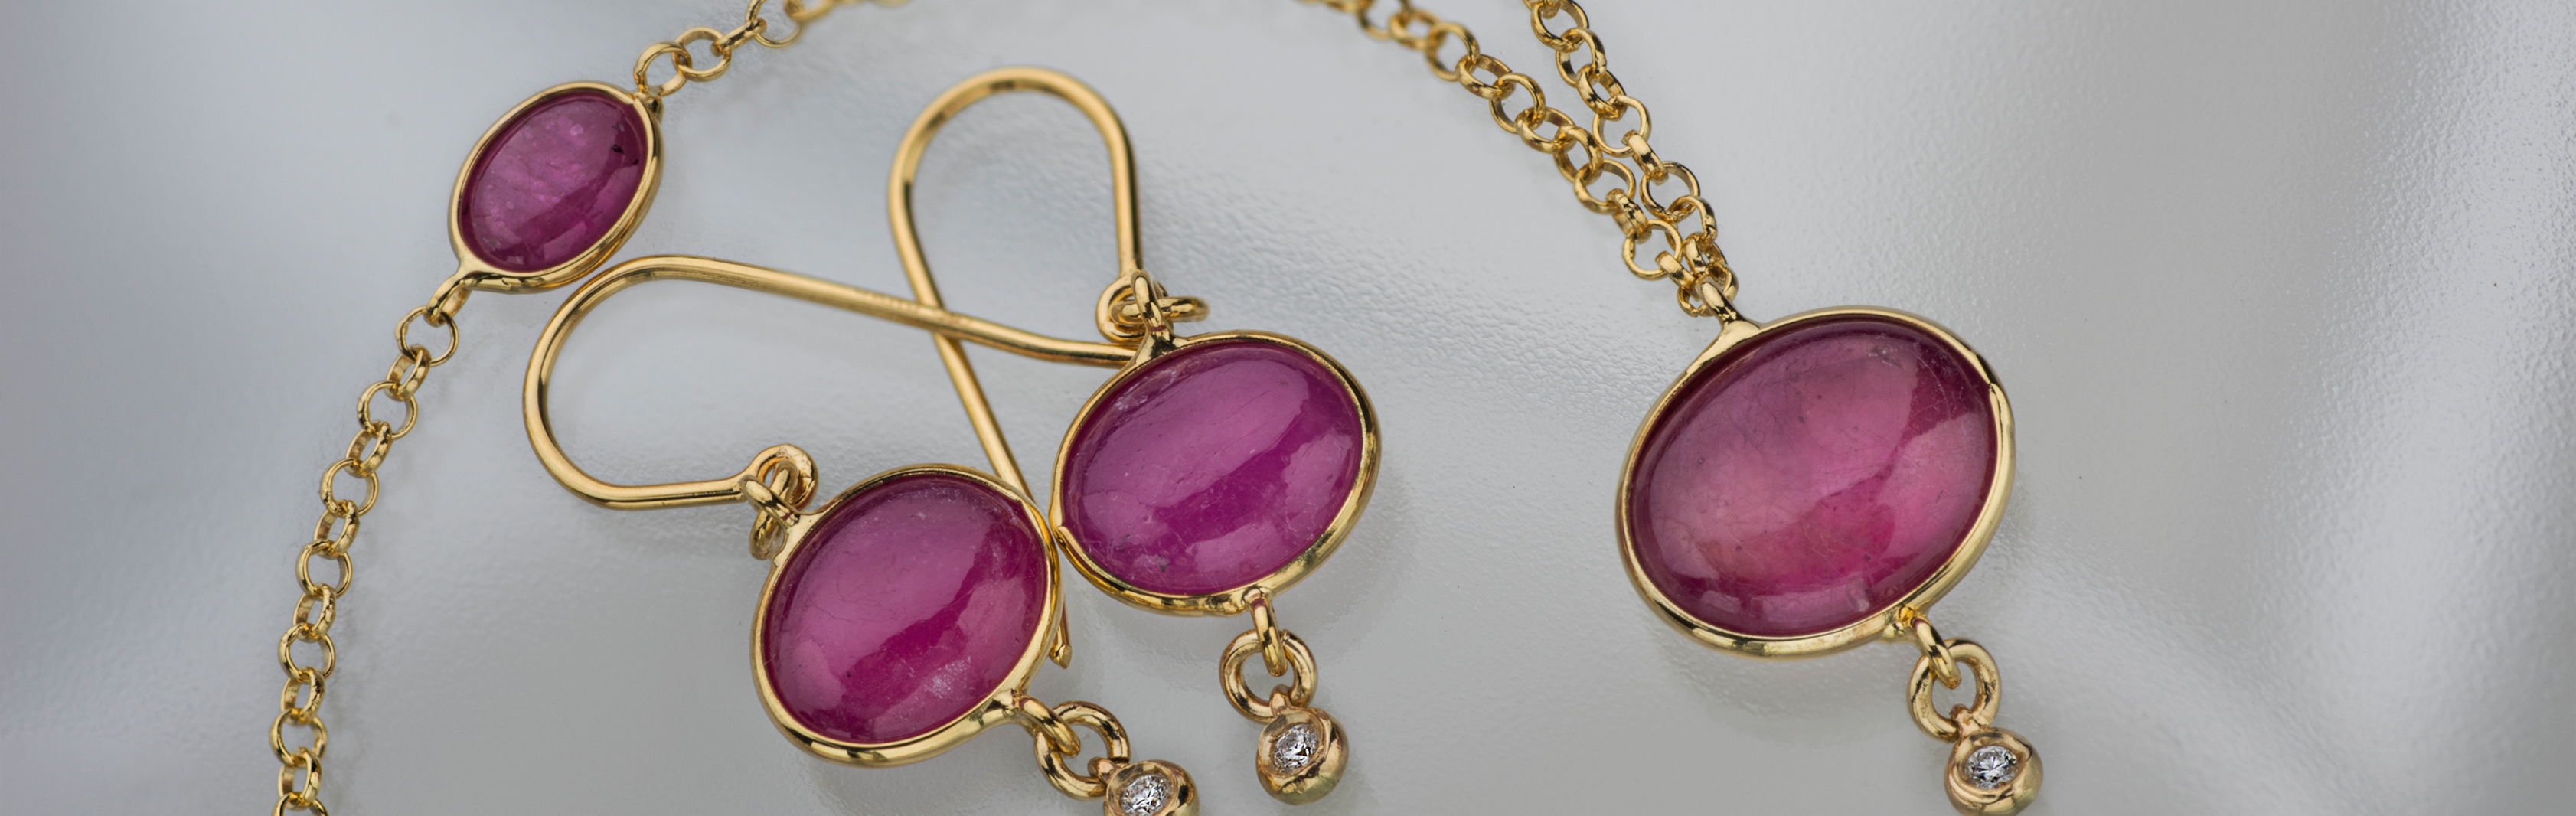 Aphrodite Collection | 14K Gold Jewelry with Ruby and Diamonds